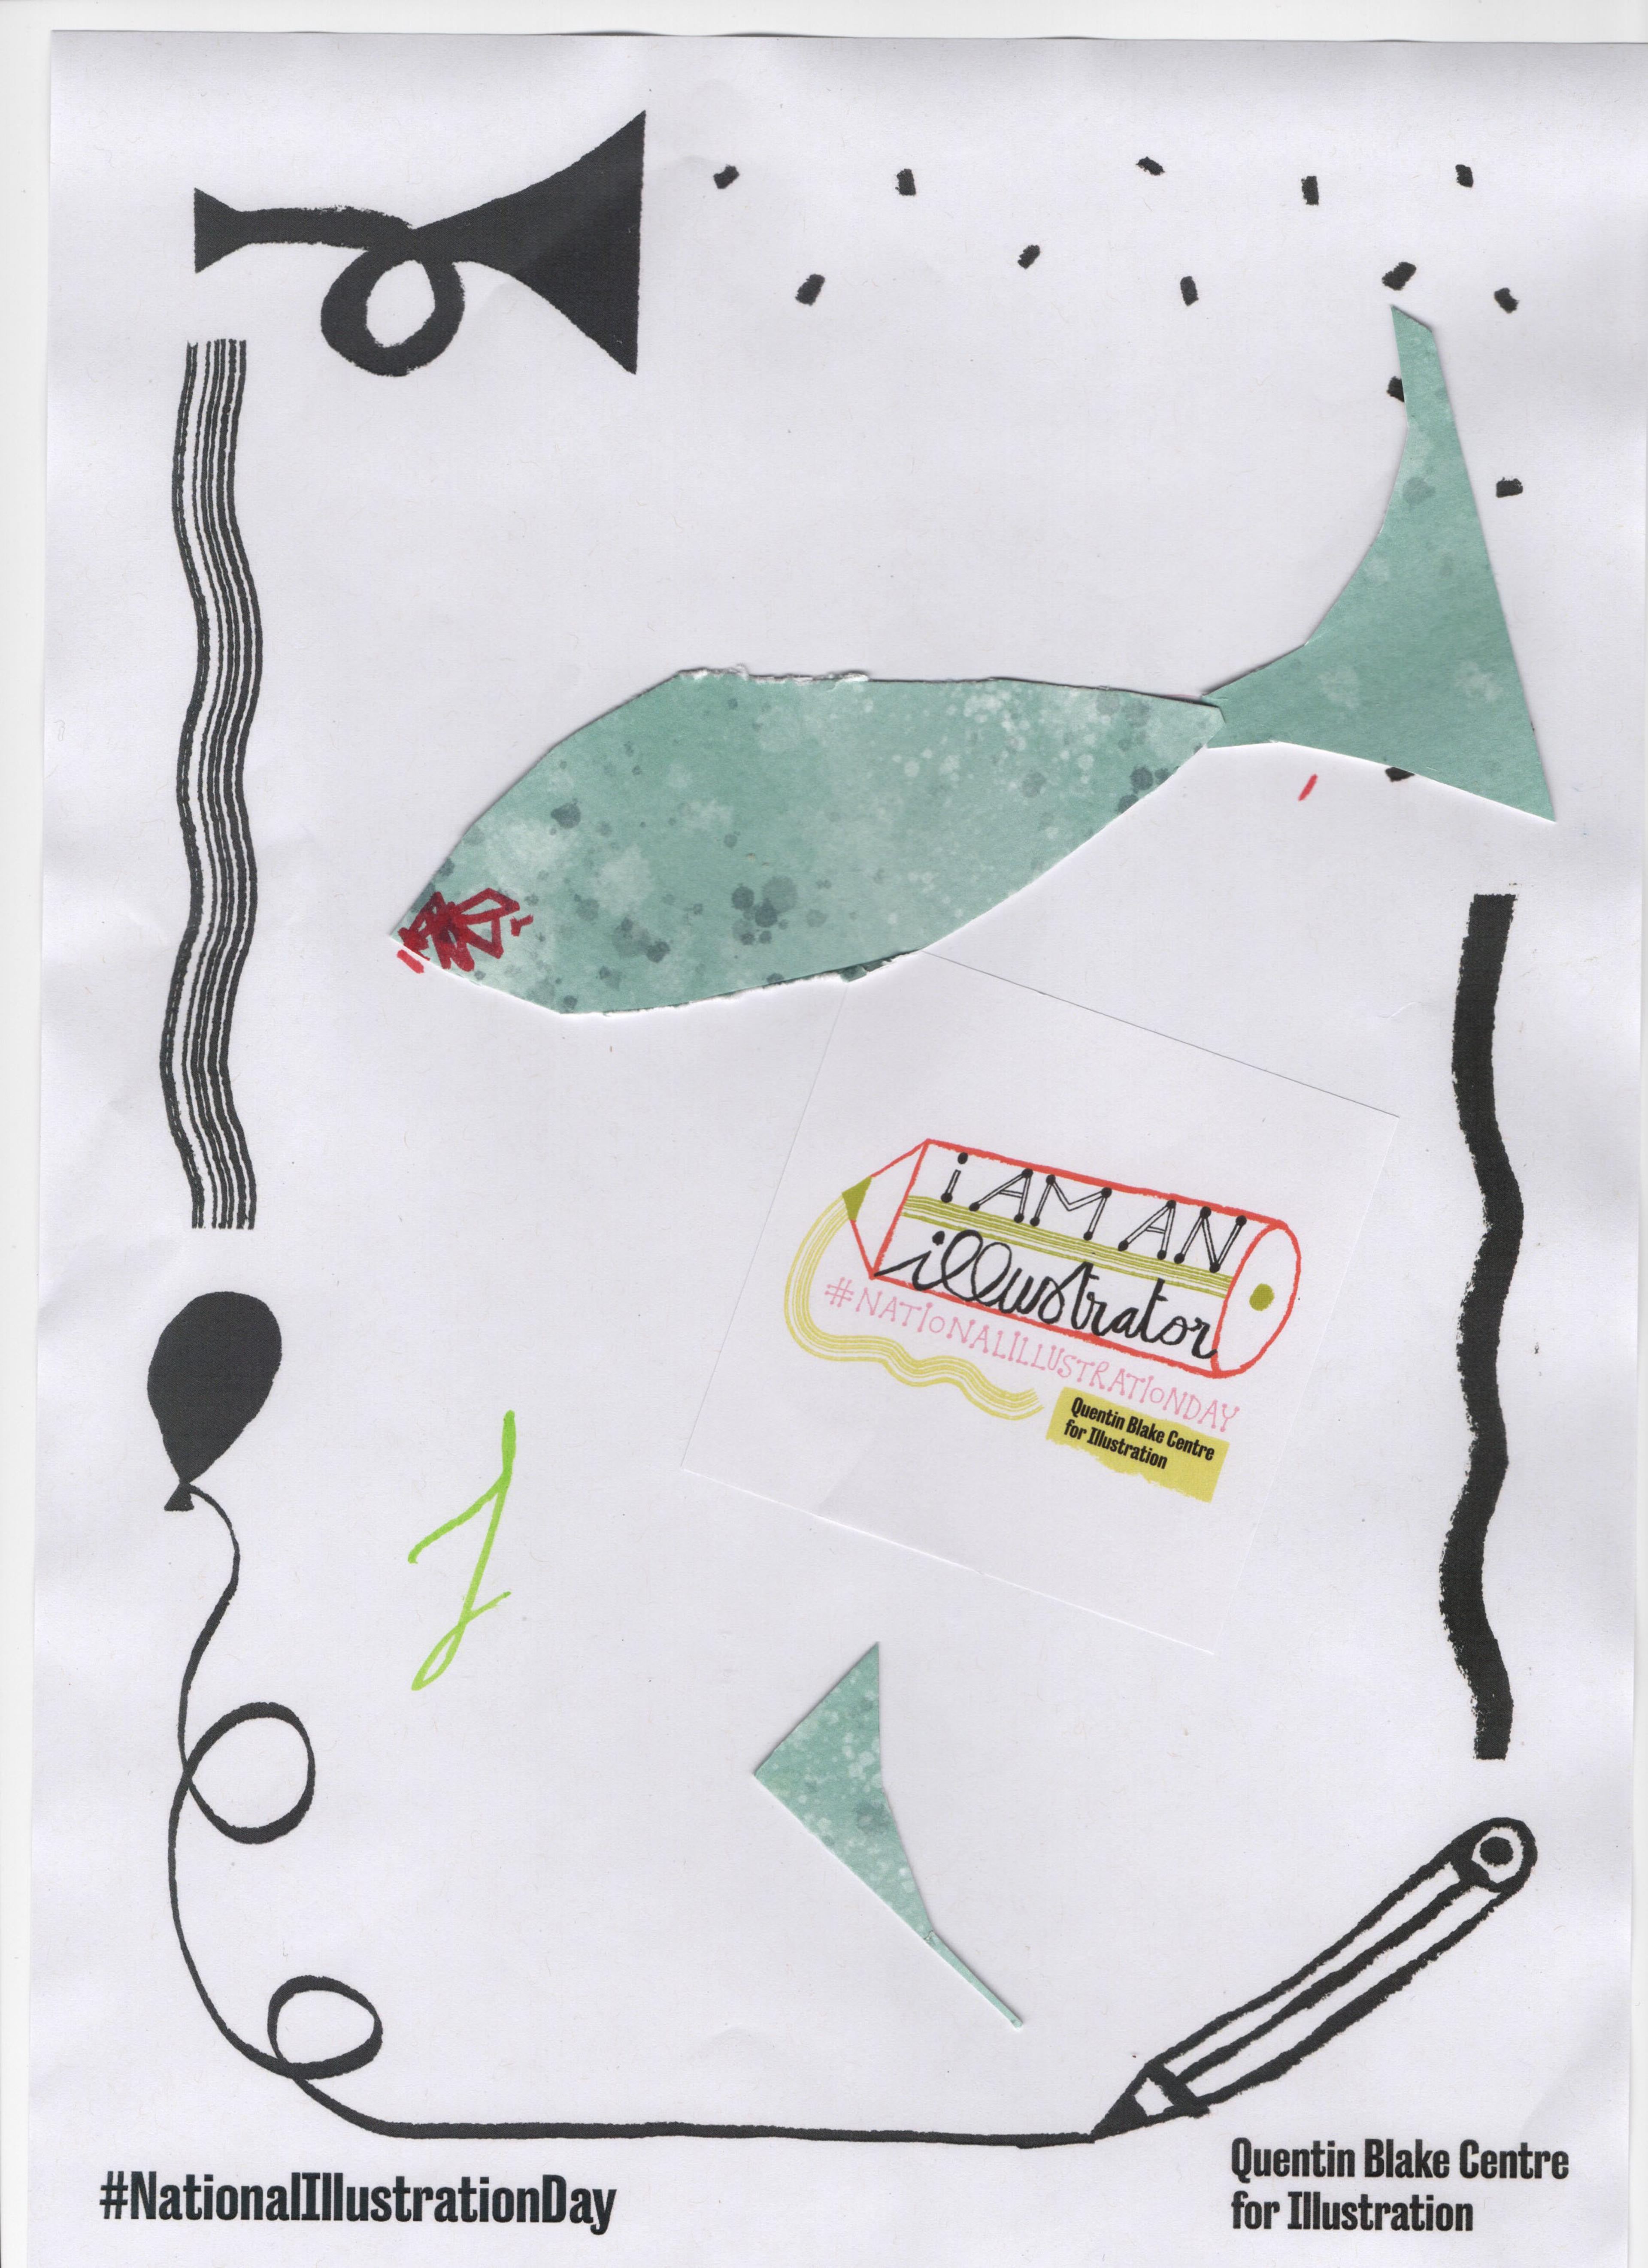 Illustration of a fish on paper with a 'I am an illustrator' sticker.